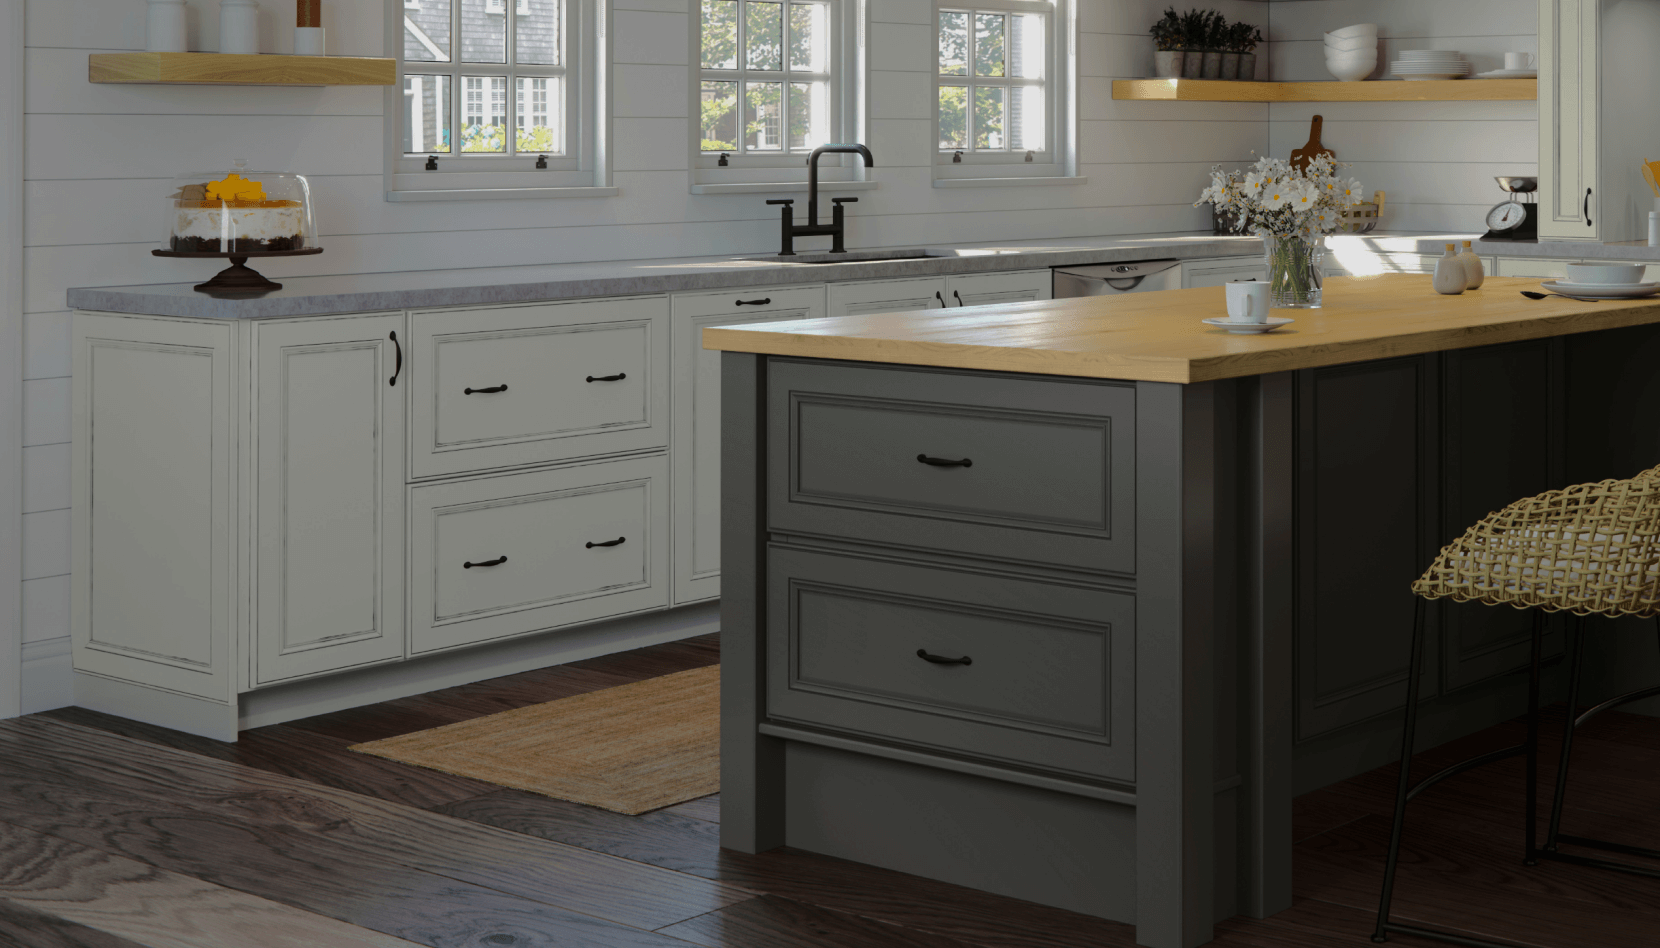 Timberlake Cabinetry As Smart As It Is Beautiful